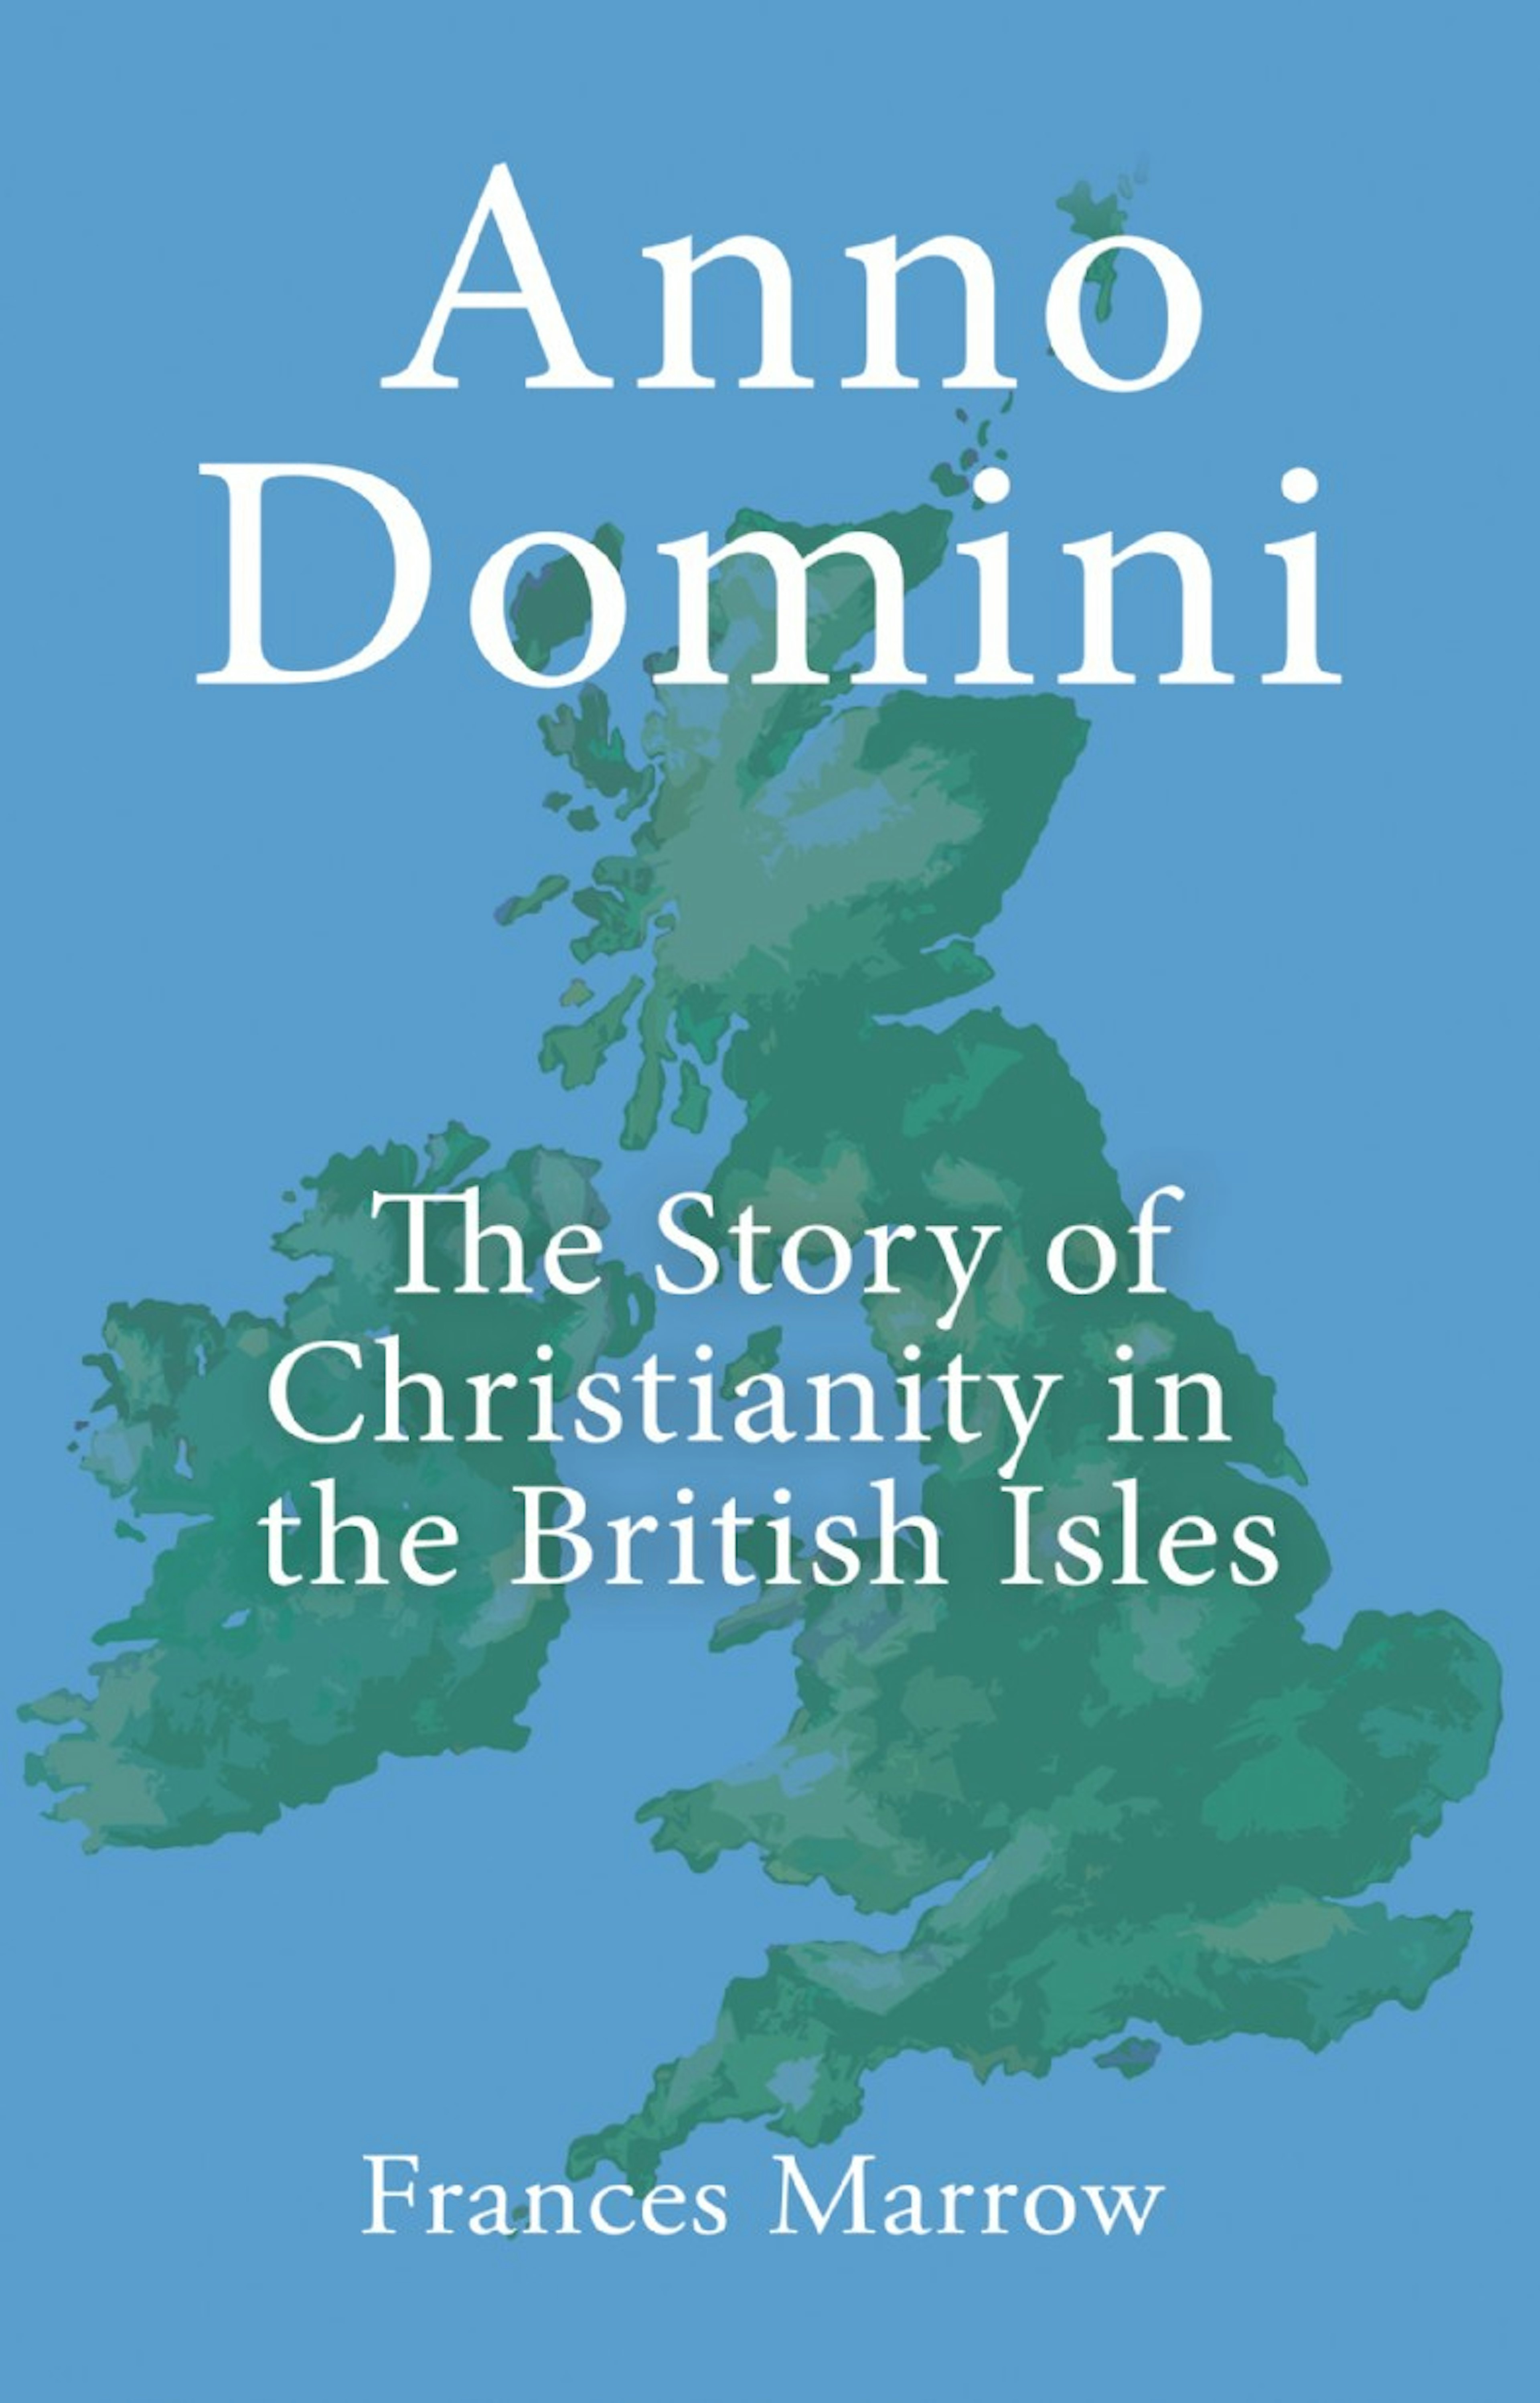 Anno Domini: The Story of Christianity in the British Isles